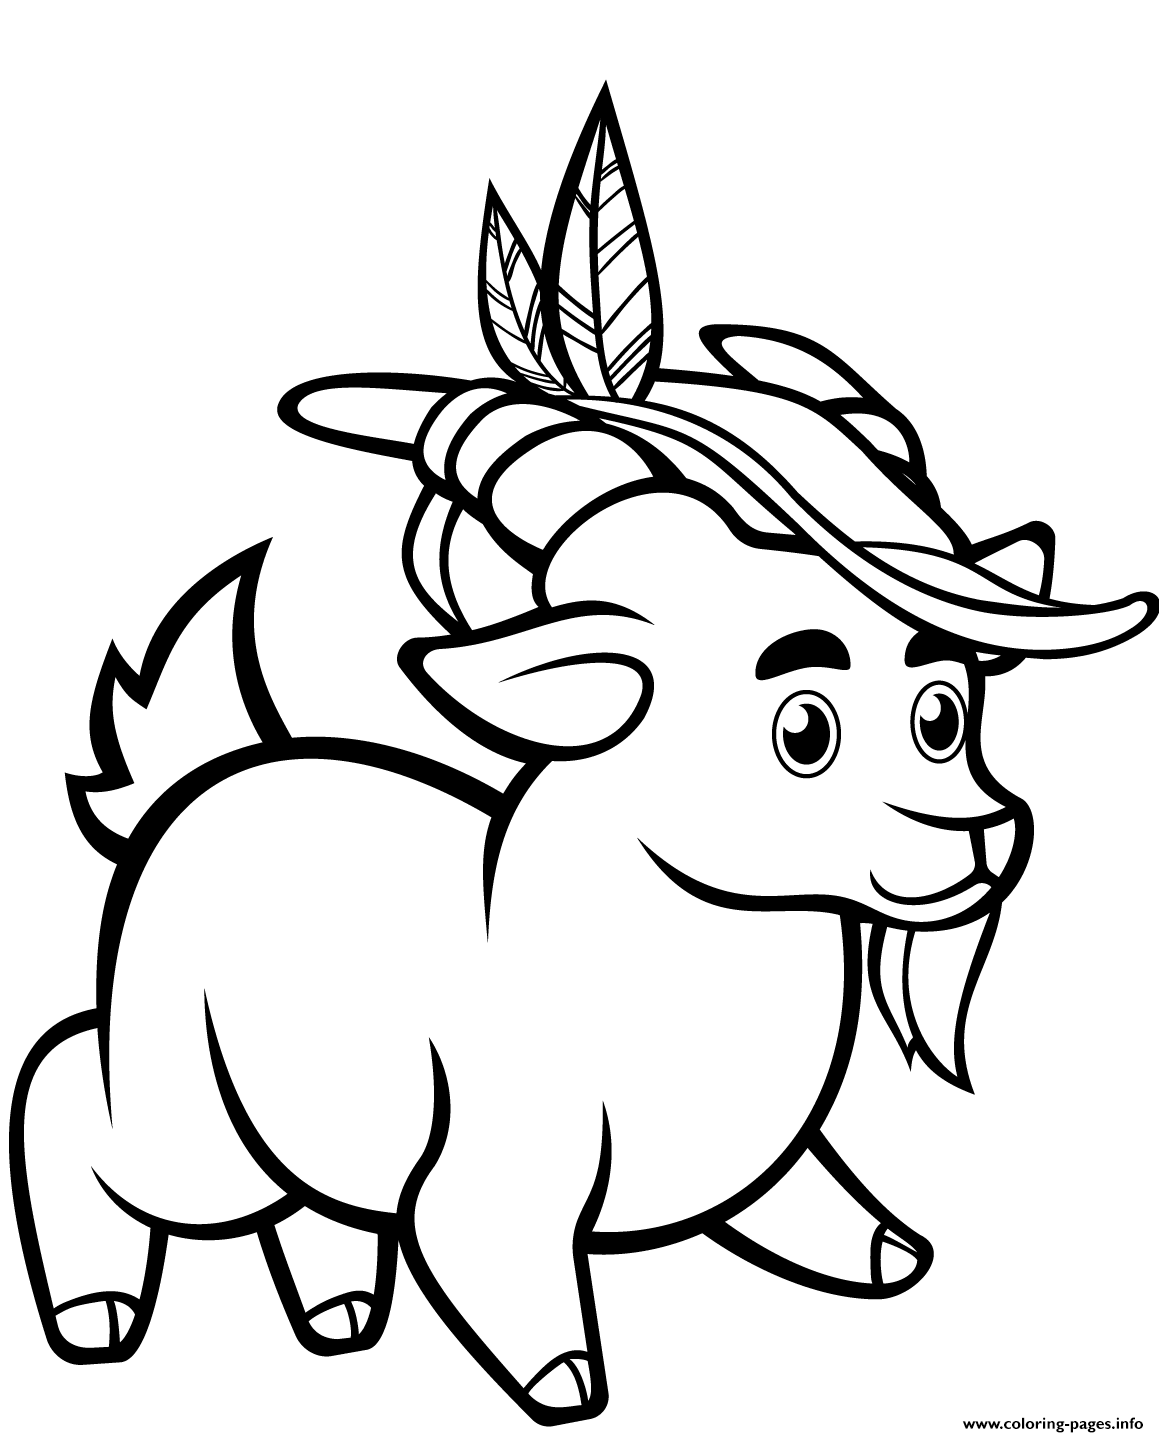 Funny Goat With Alpine Hat coloring